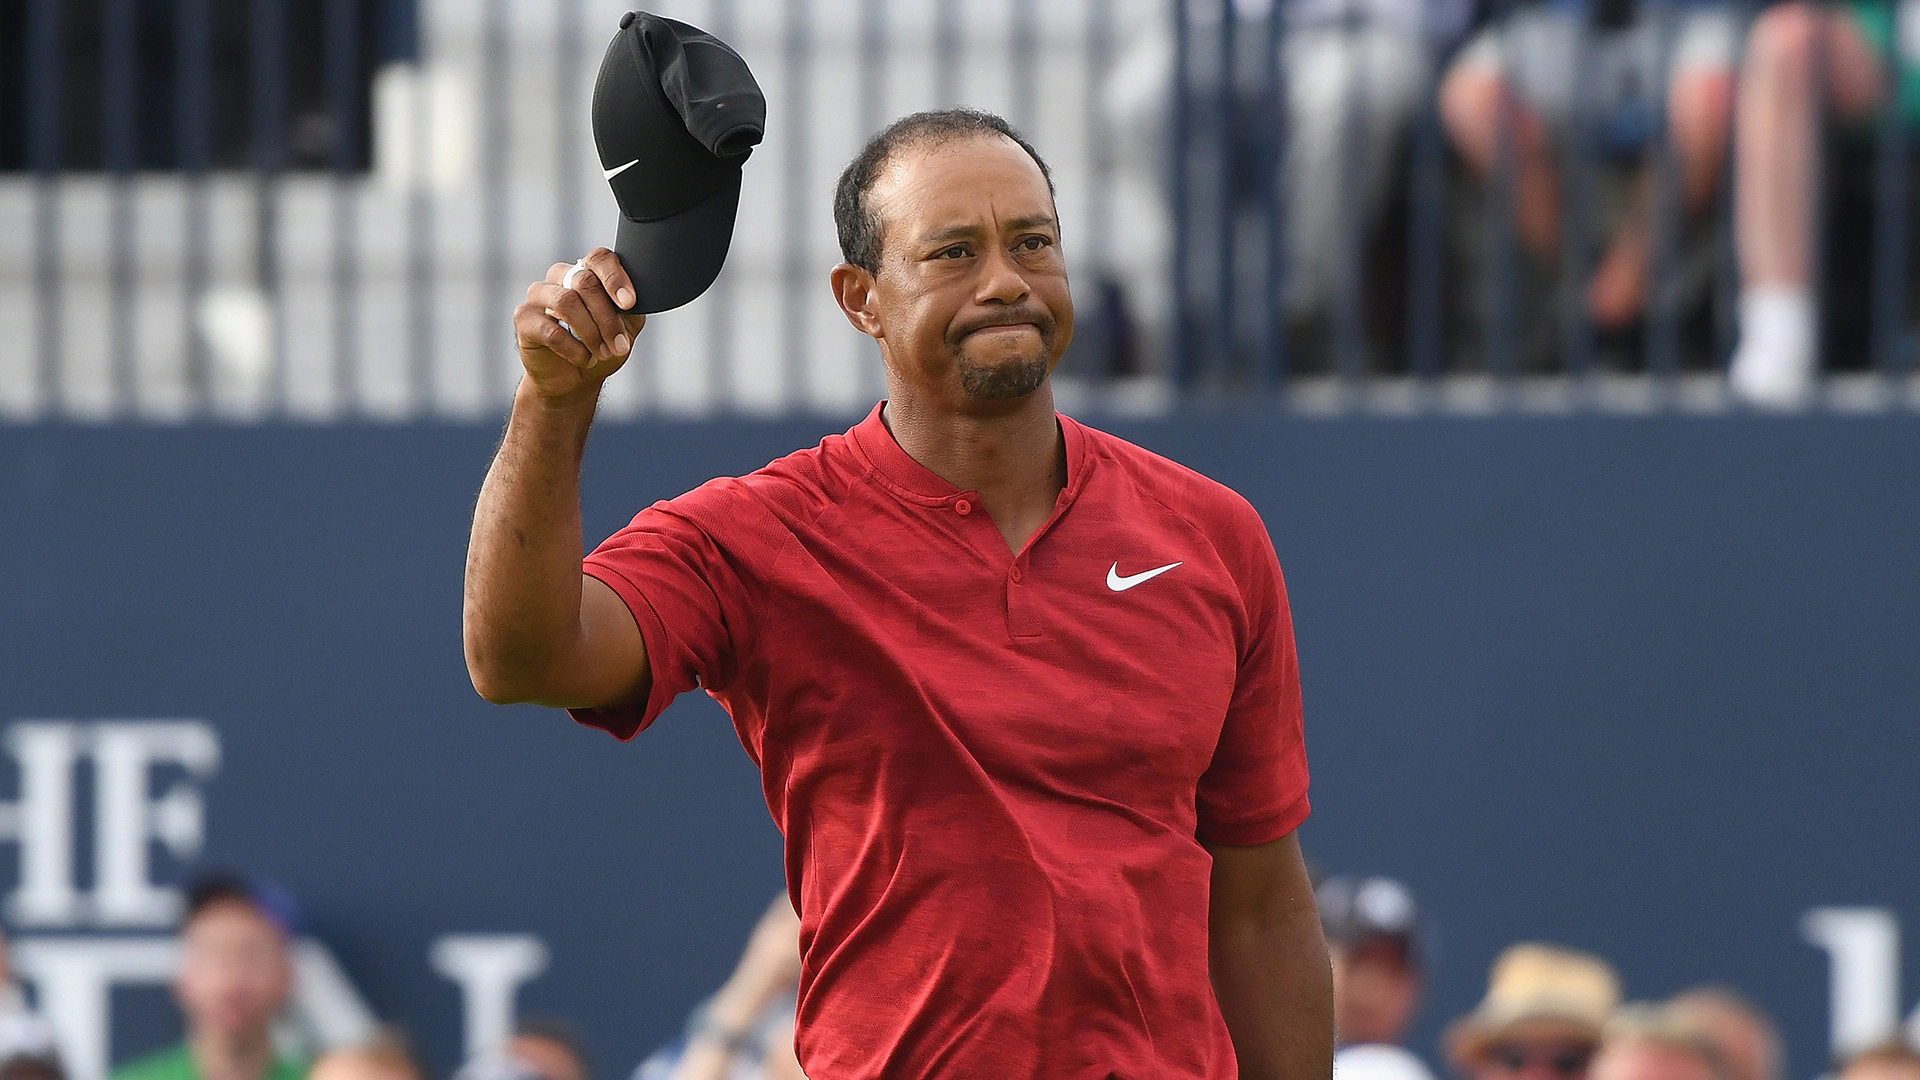 Woods took Swiss vacation after stinging Open defeat